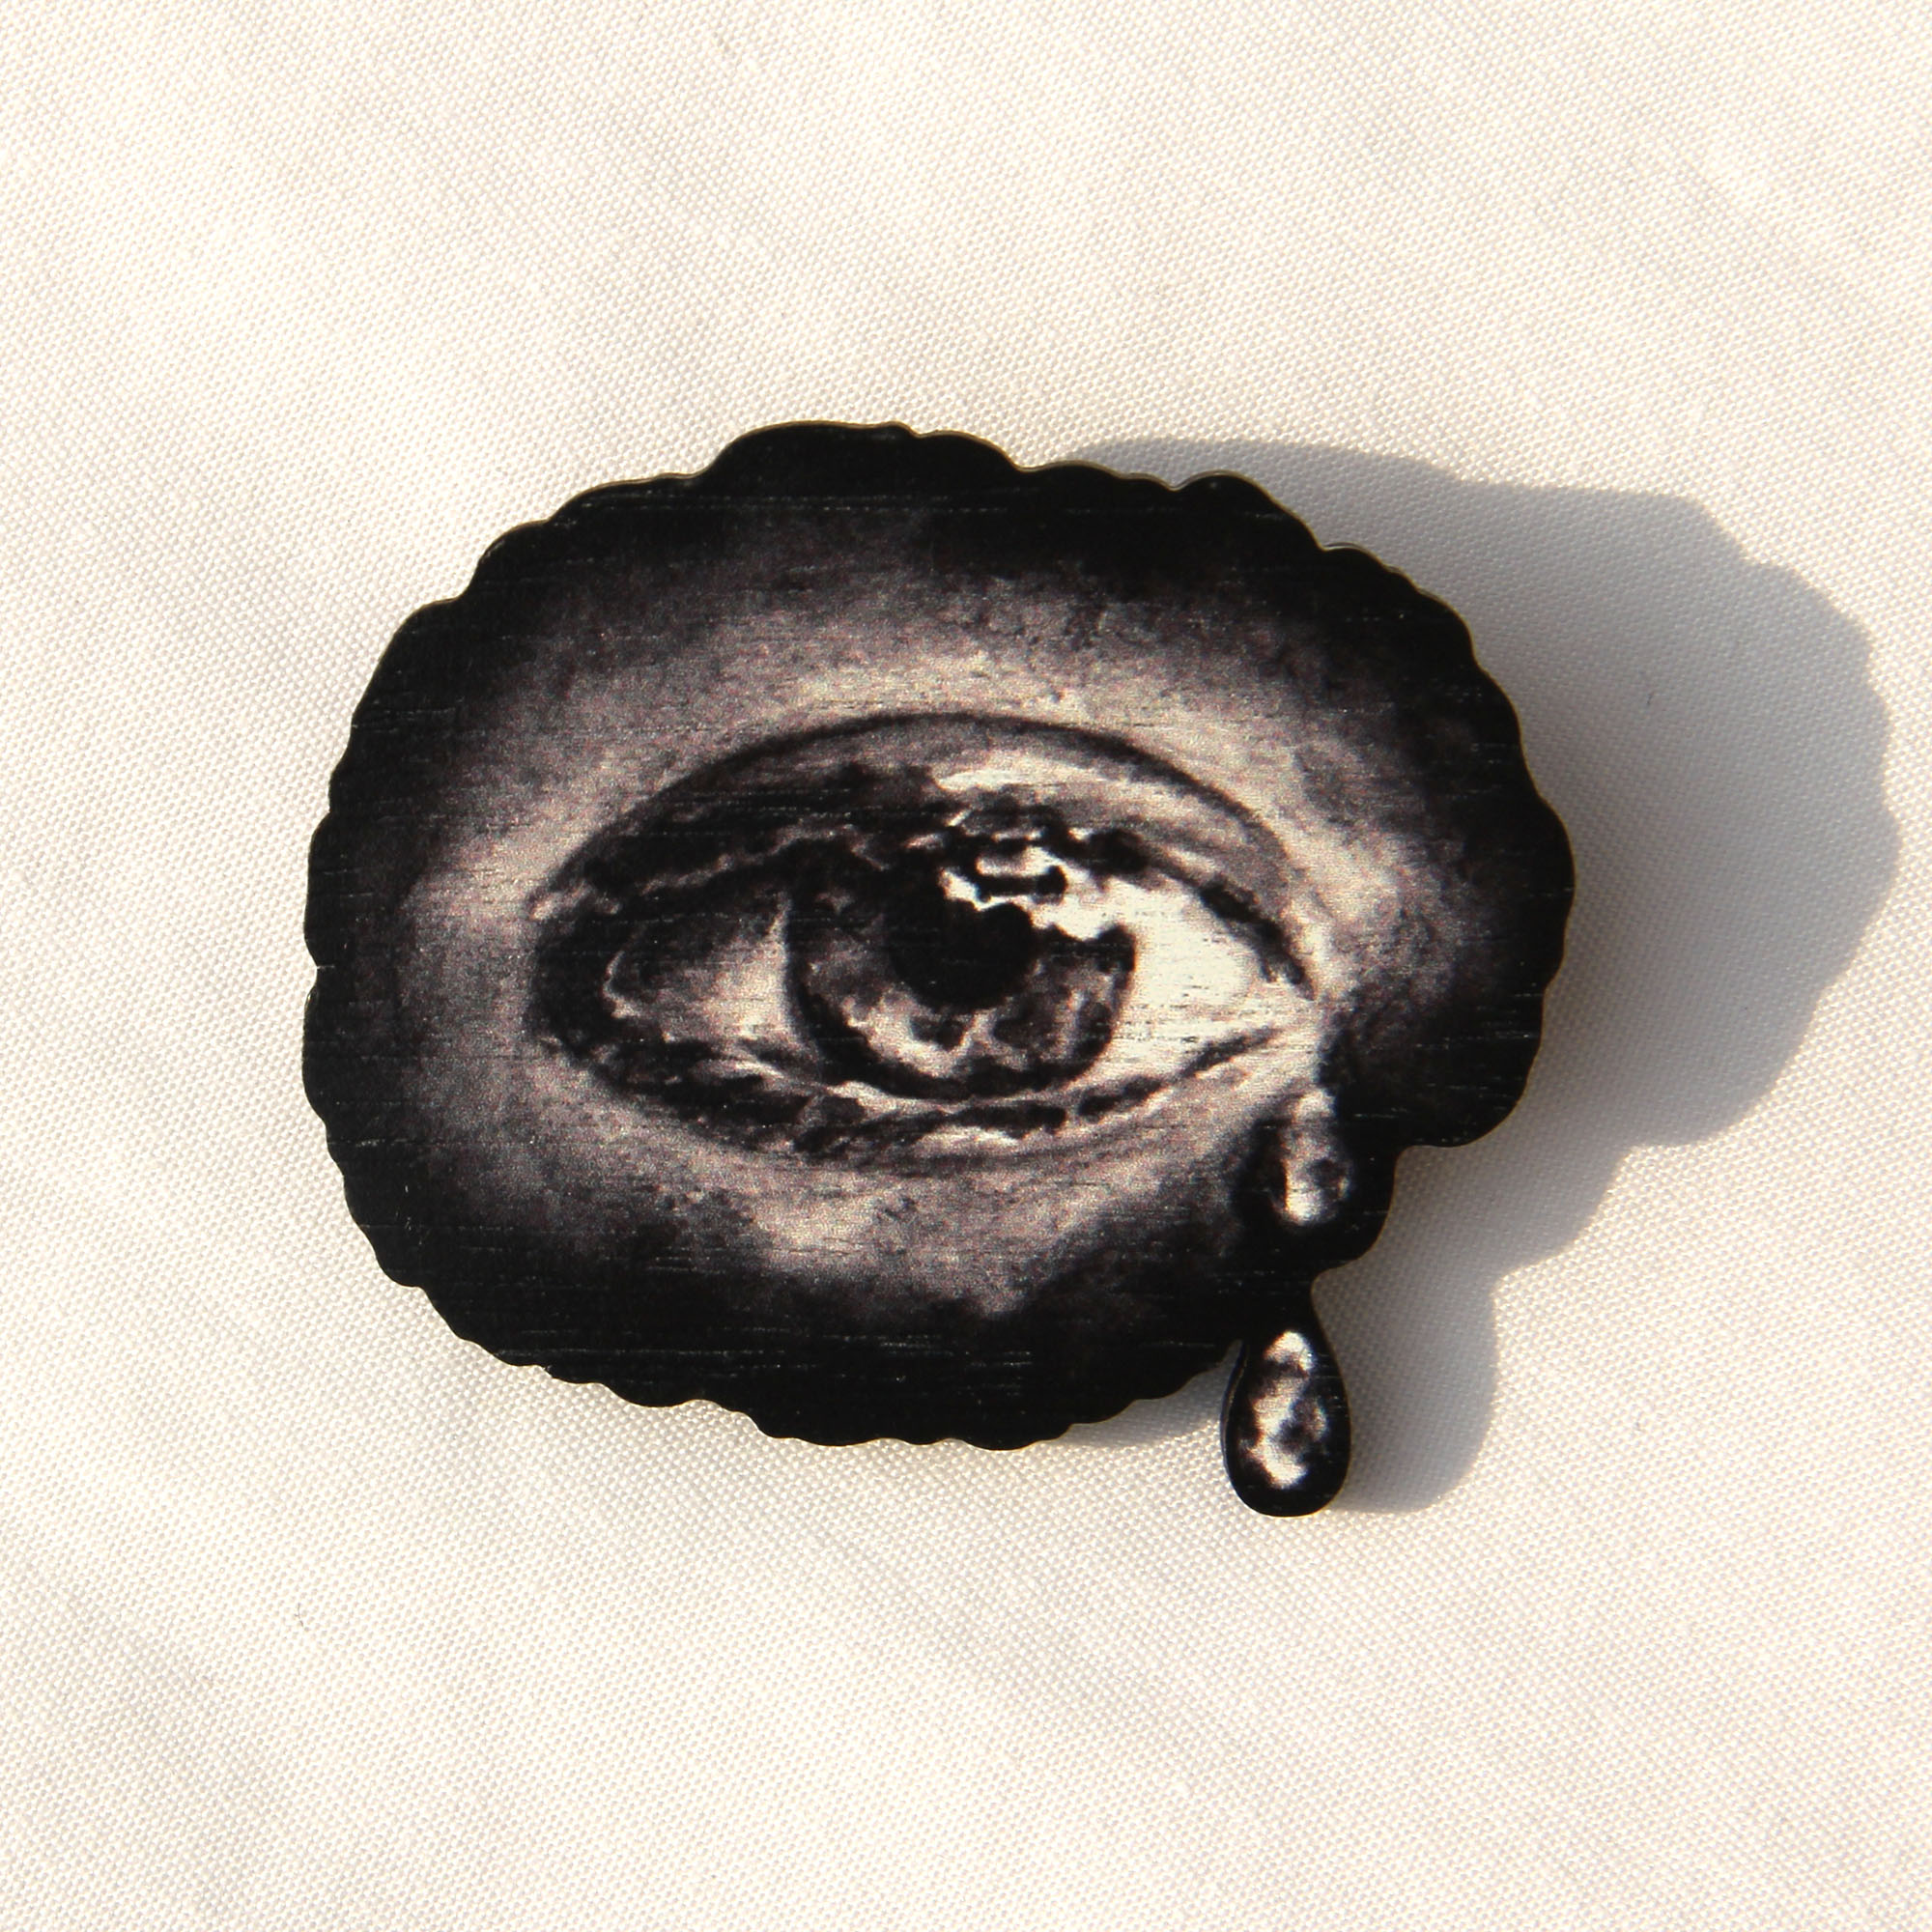 A wooden brooch printed with monochrome water-colour artwork of an eye with tears at the right corner on a white background.